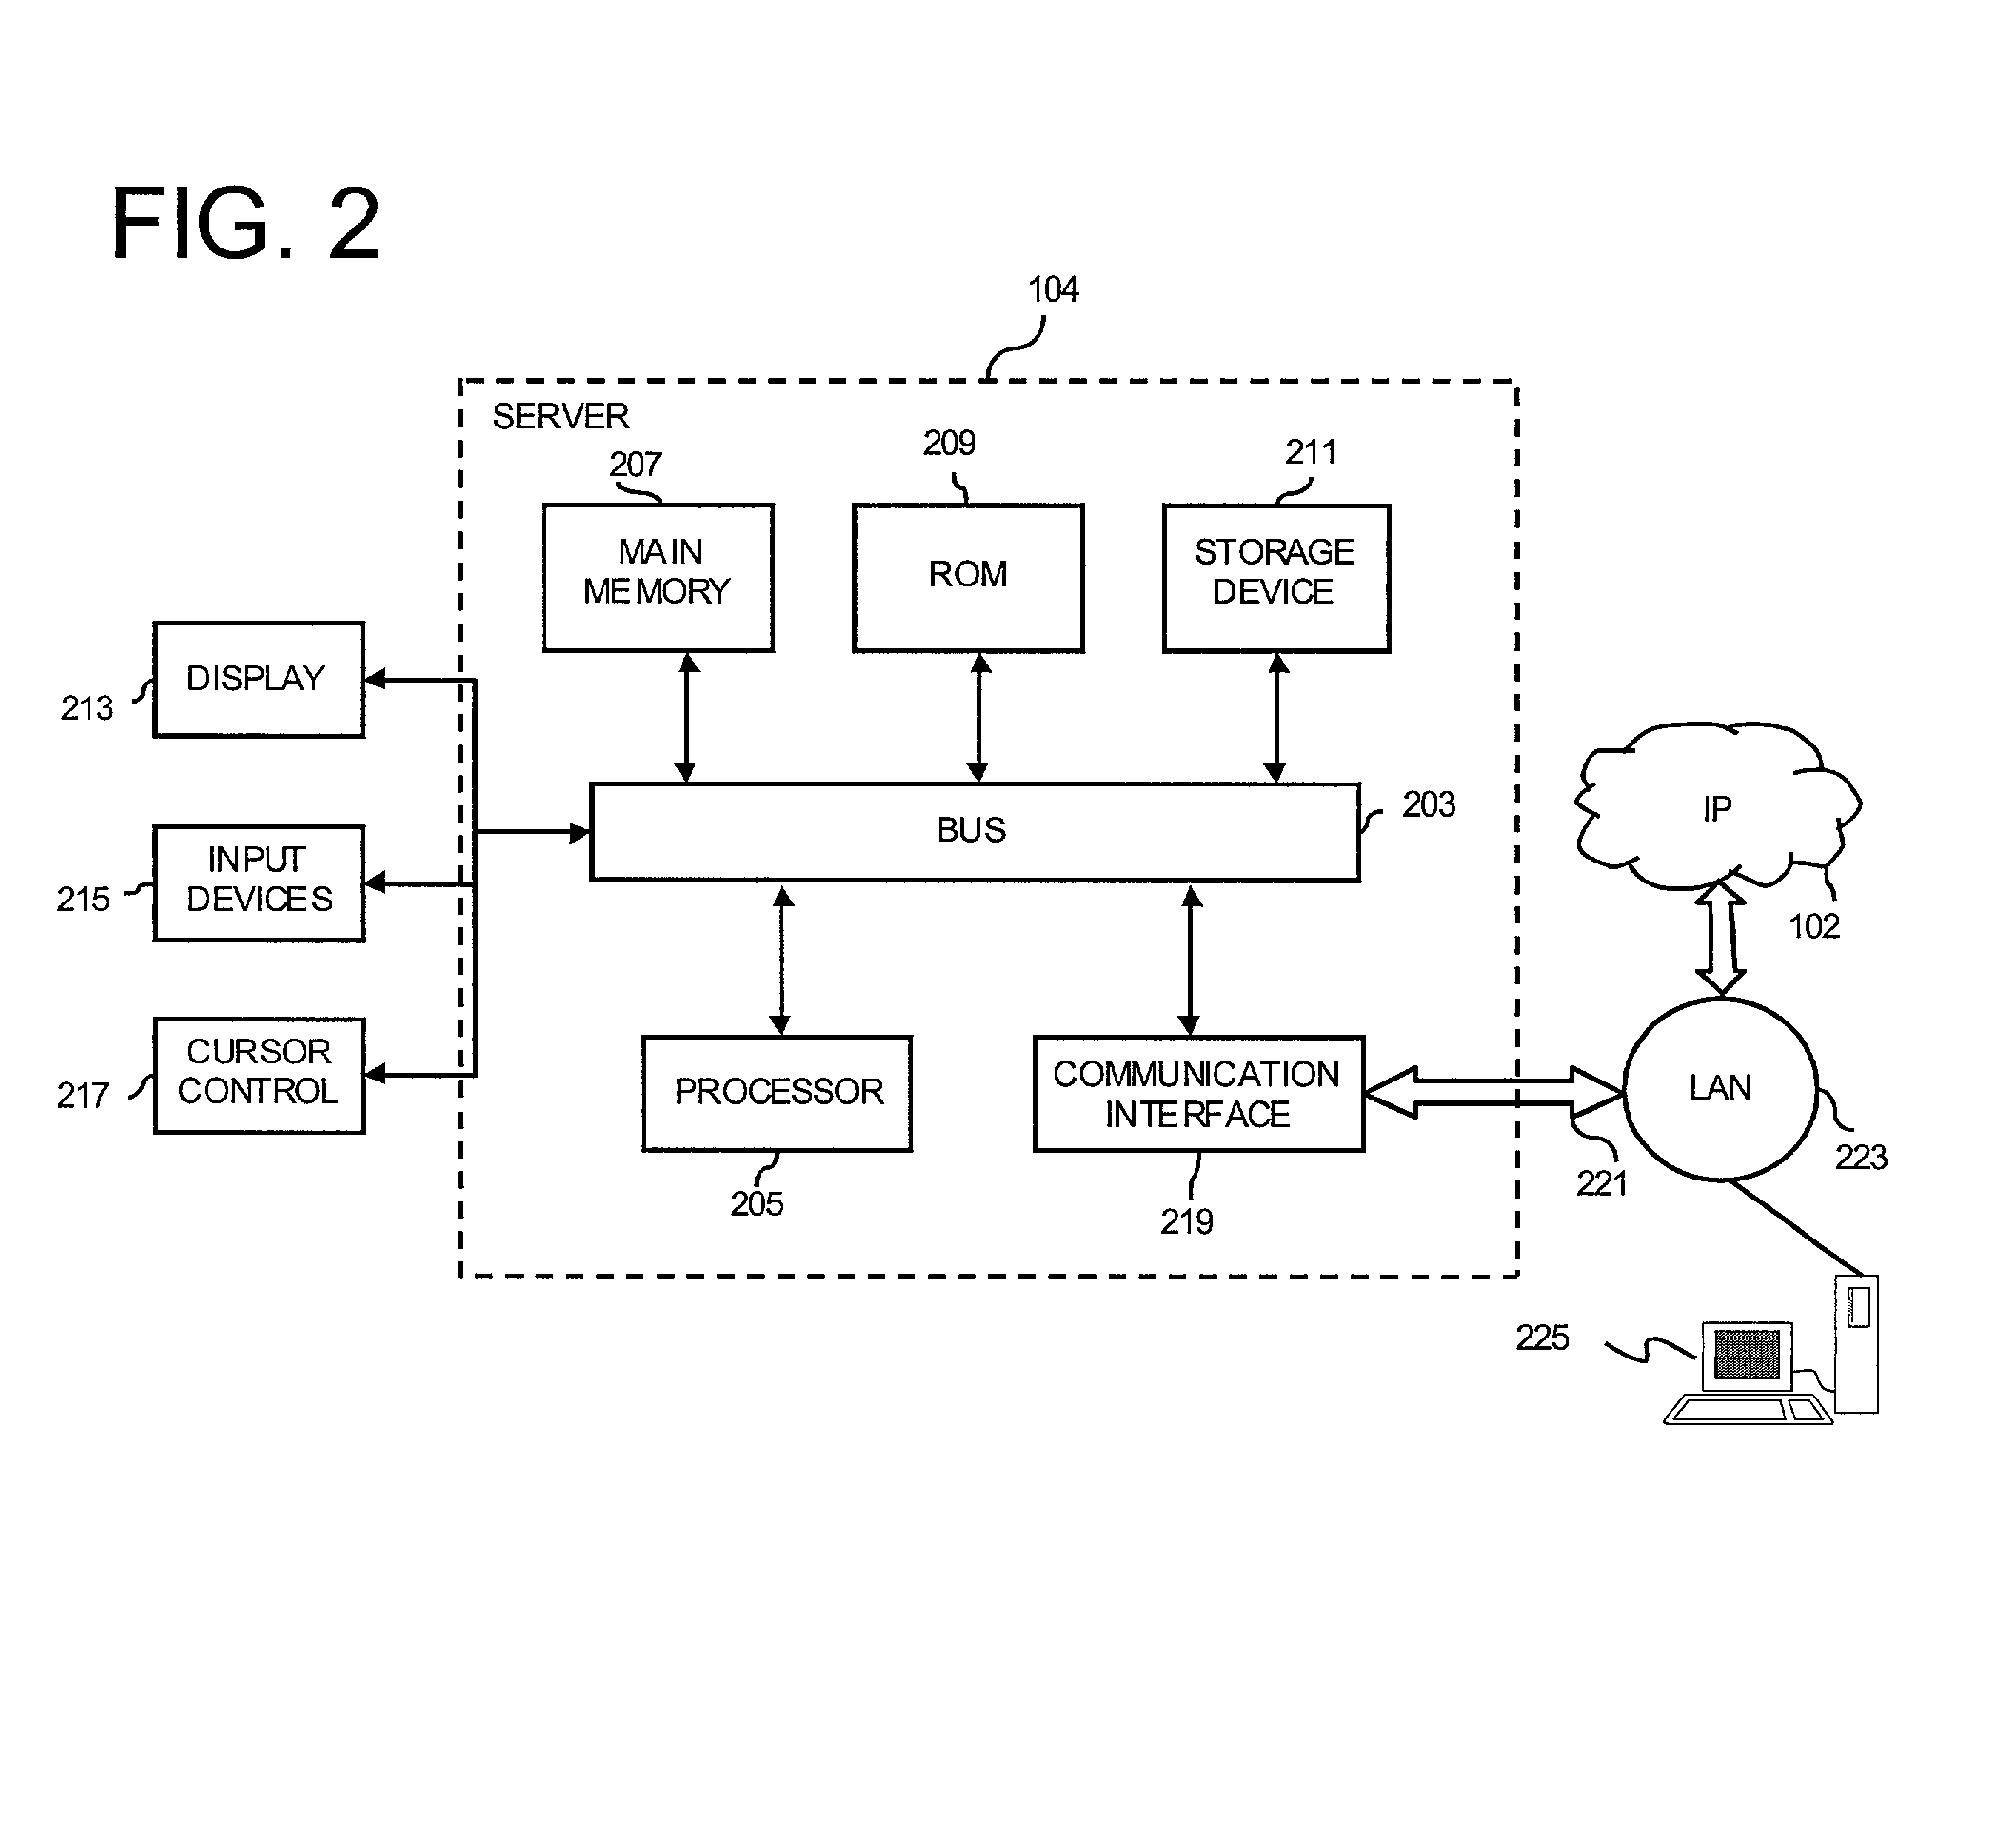 Apparatus, method and system for printing from a wireless mobile device over the internet